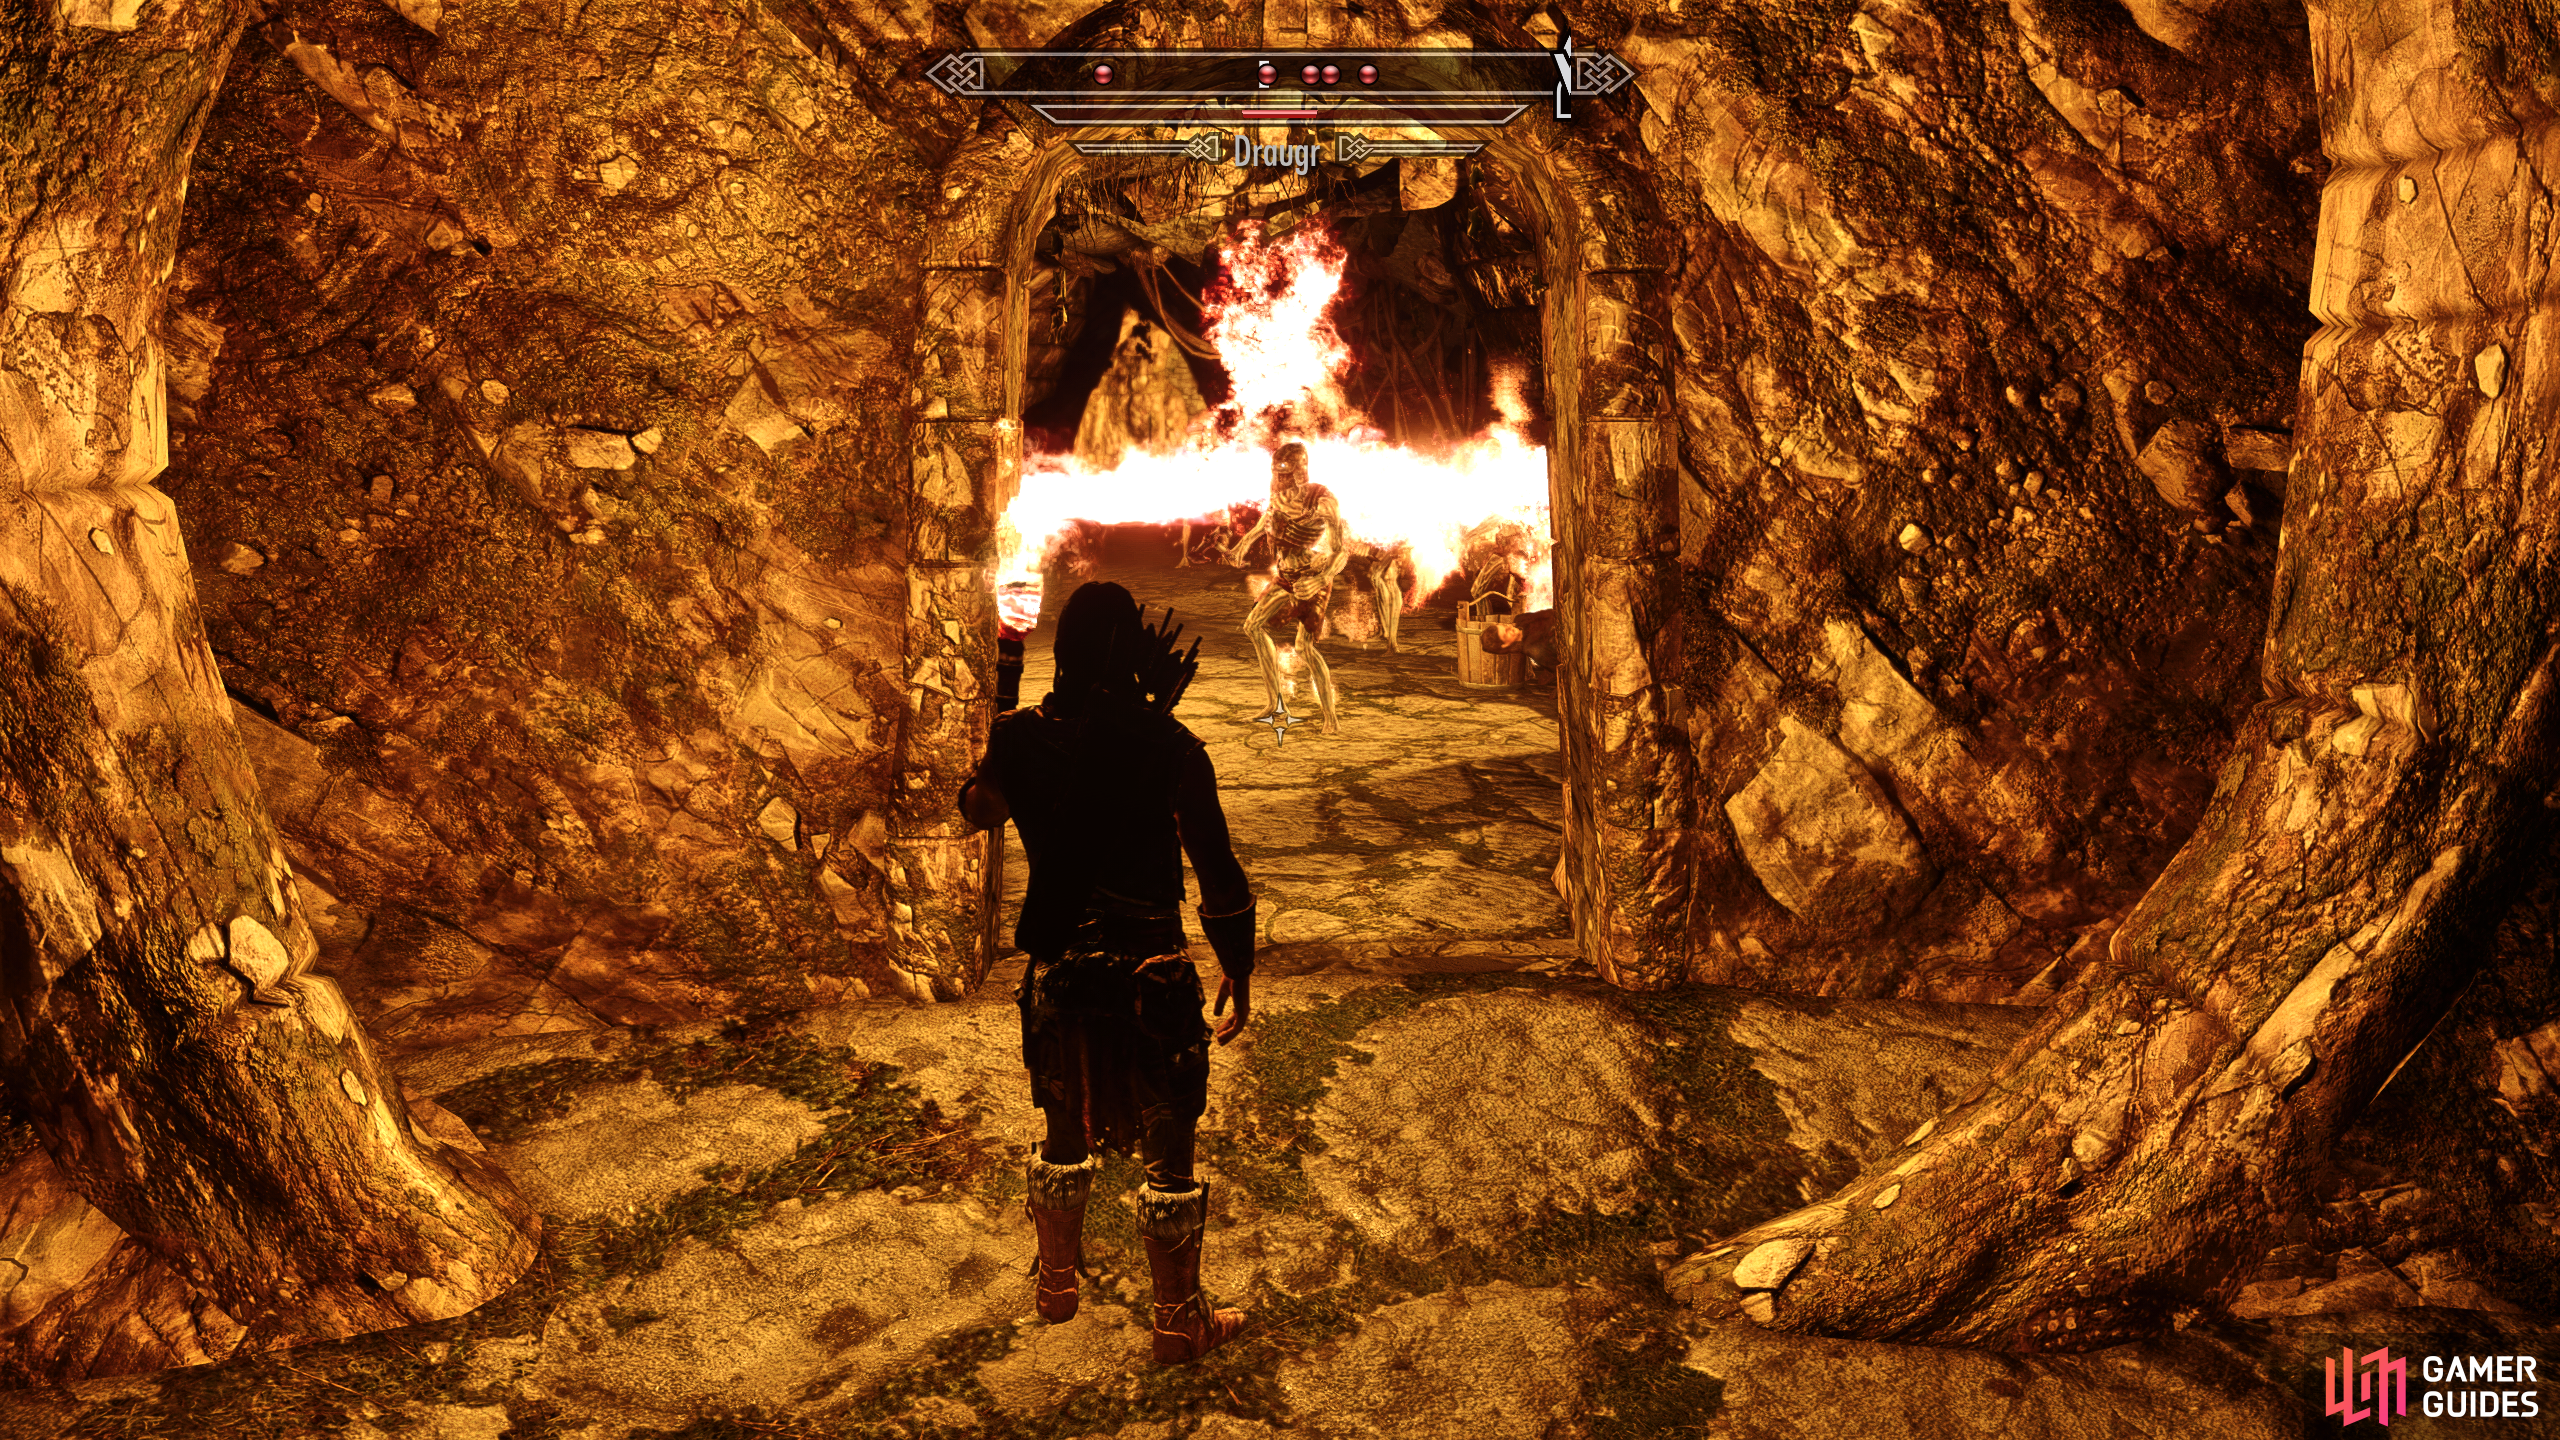 You can wait for the mages, bandits, and draugr to fight each other before finishing them off.